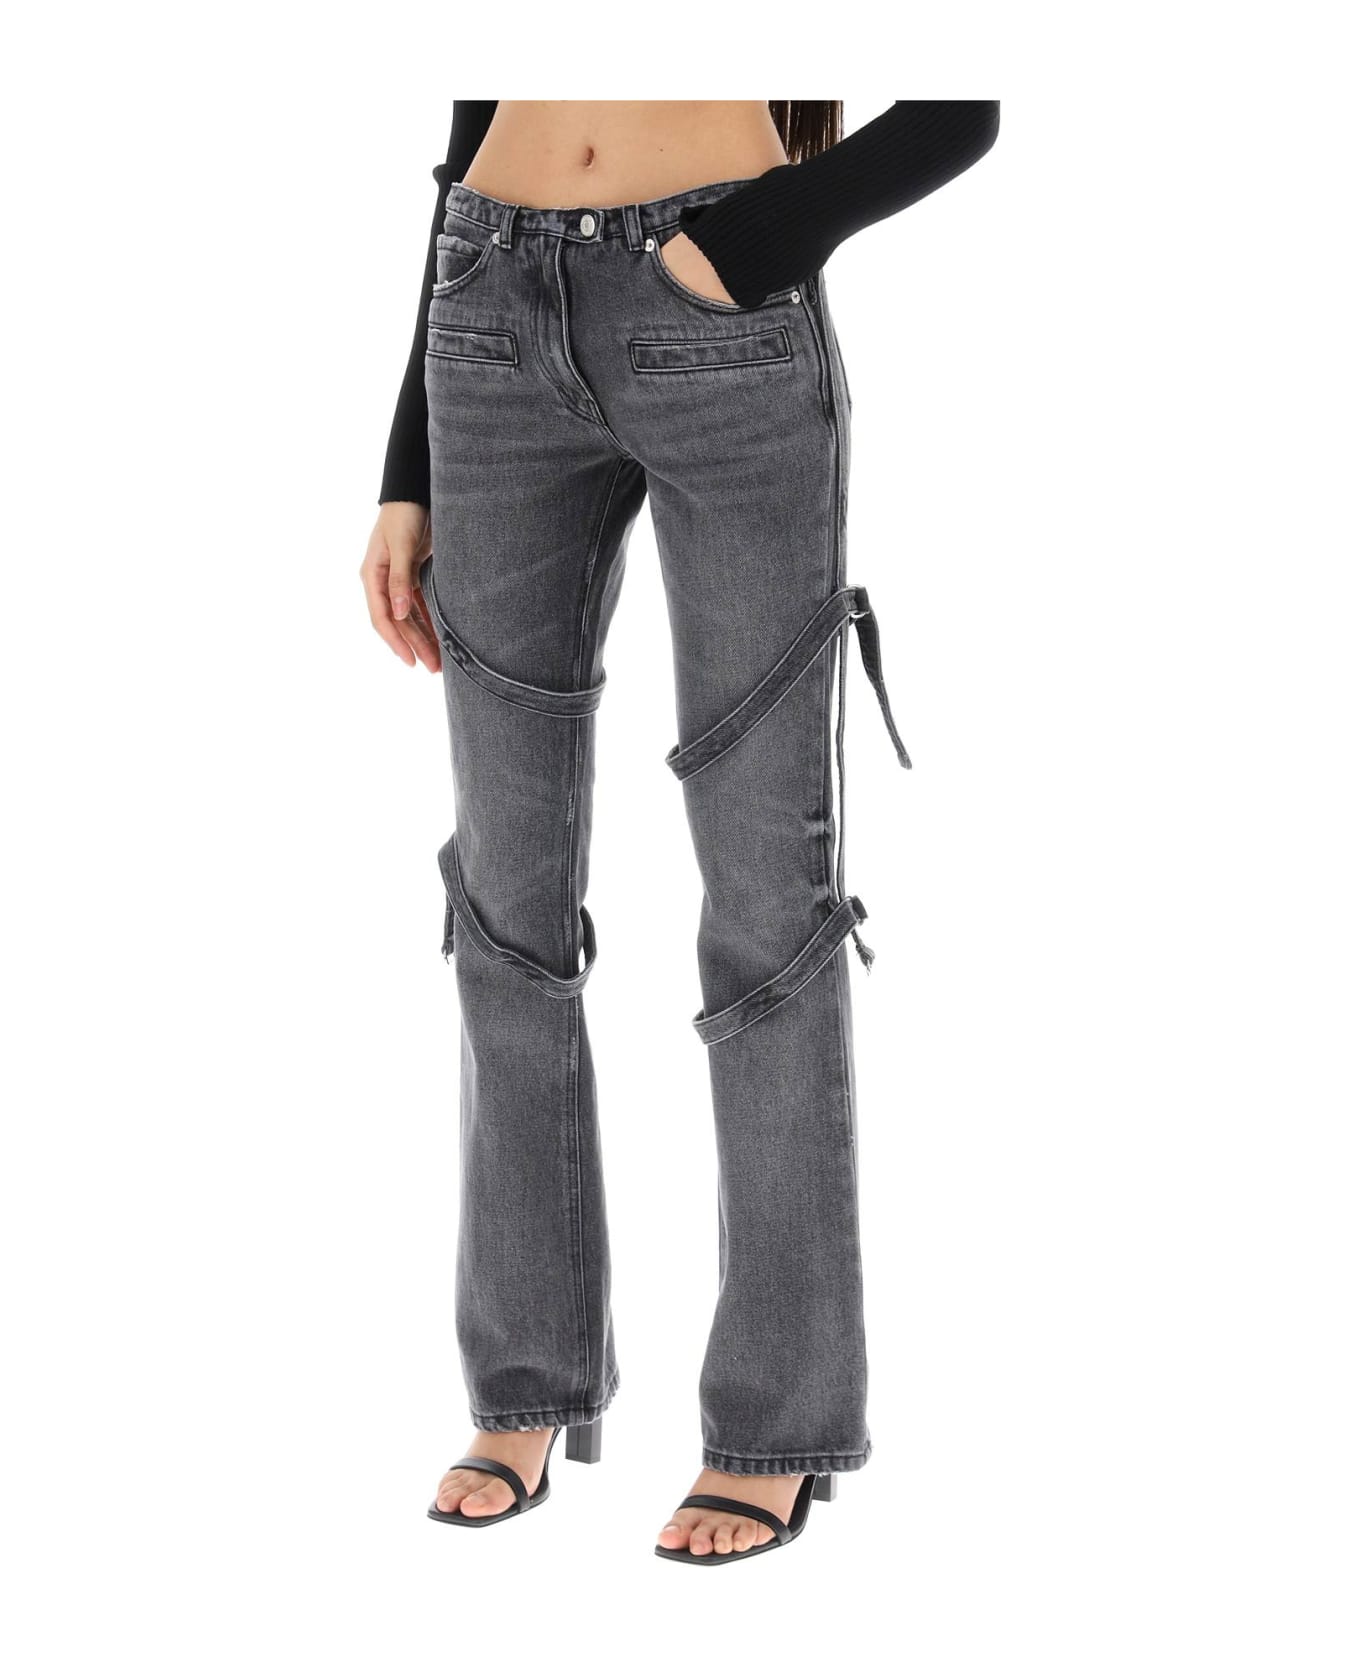 Courrèges Bootcut Jeans With Straps - STONEWAHSED GREY (Grey)